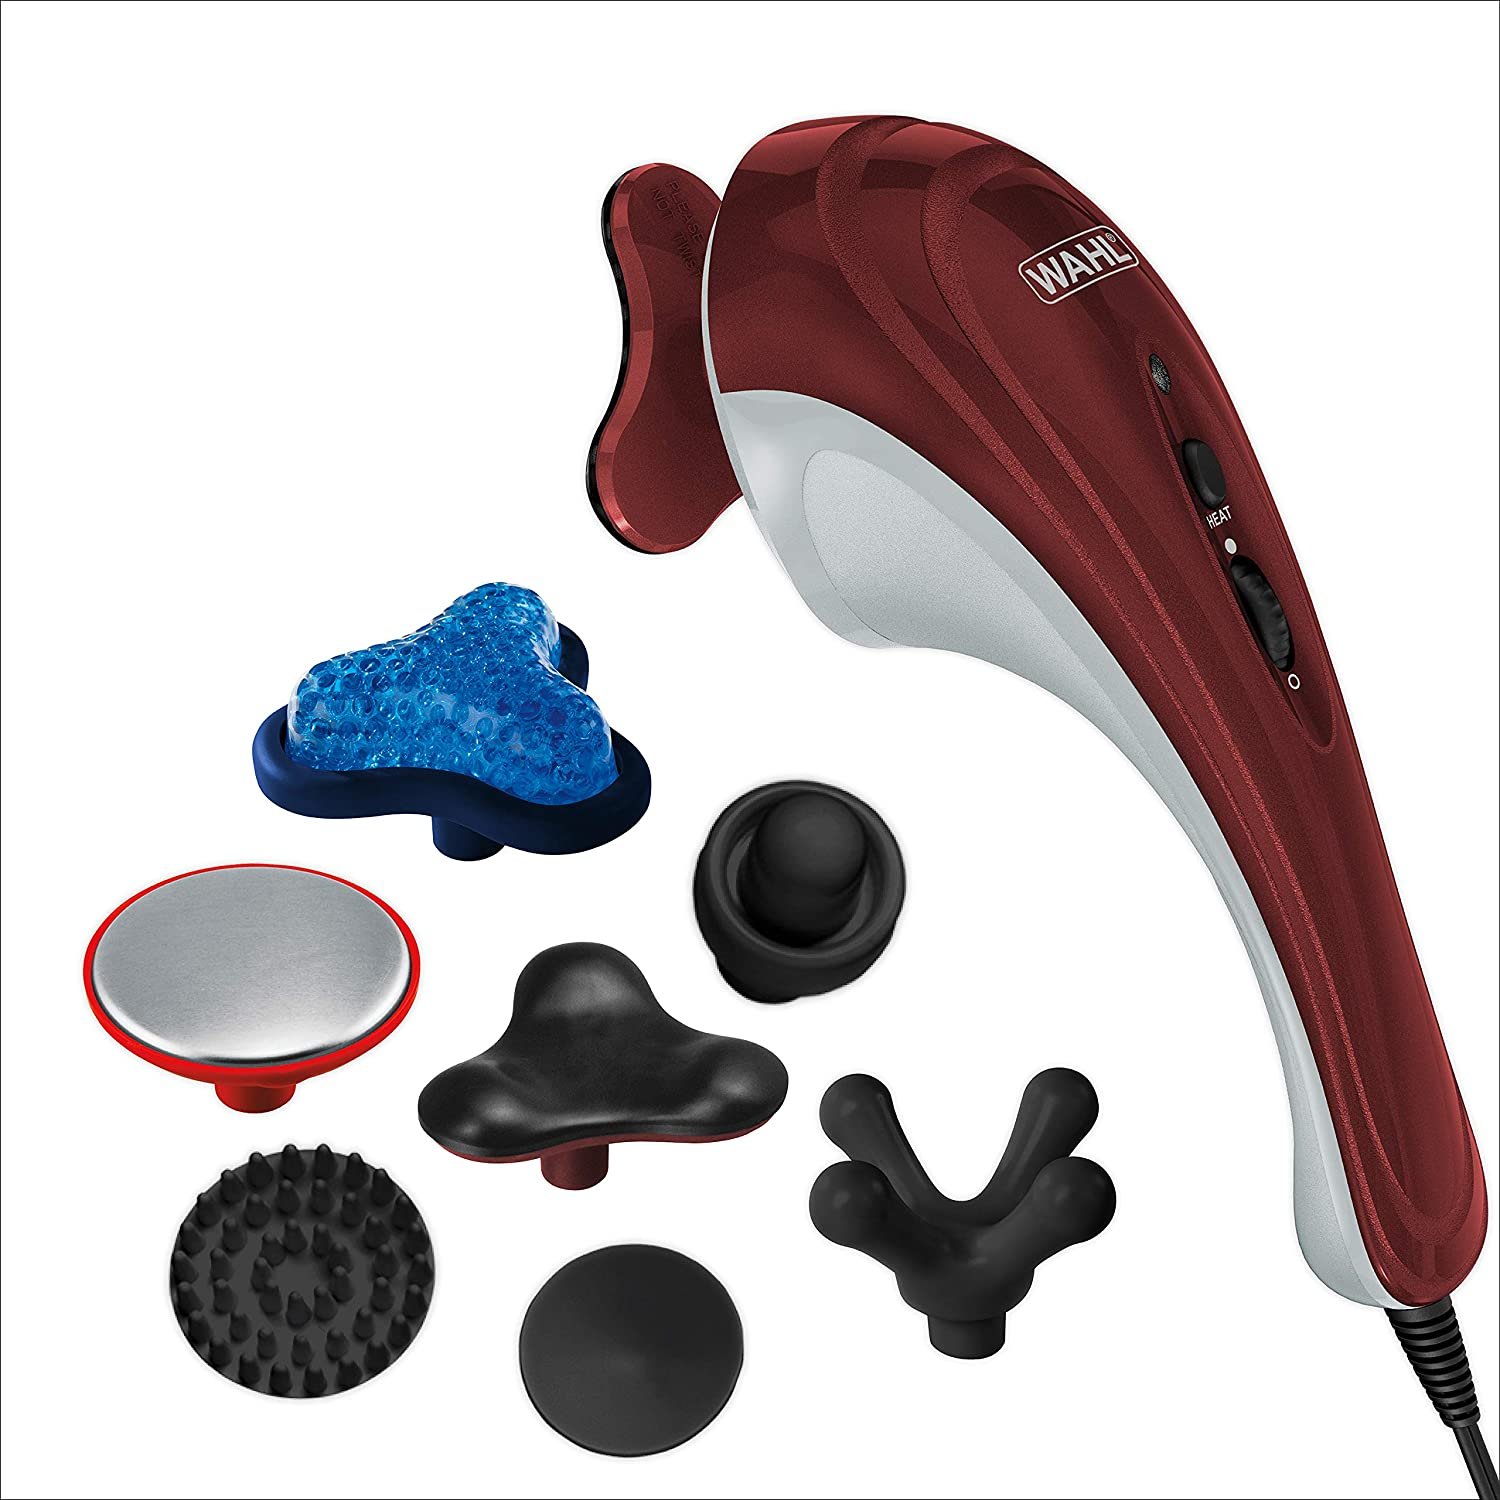 Wahl Hot Cold Deluxe Heat Therapy Electric Massager Variable Intensity For Customized Pain Relief